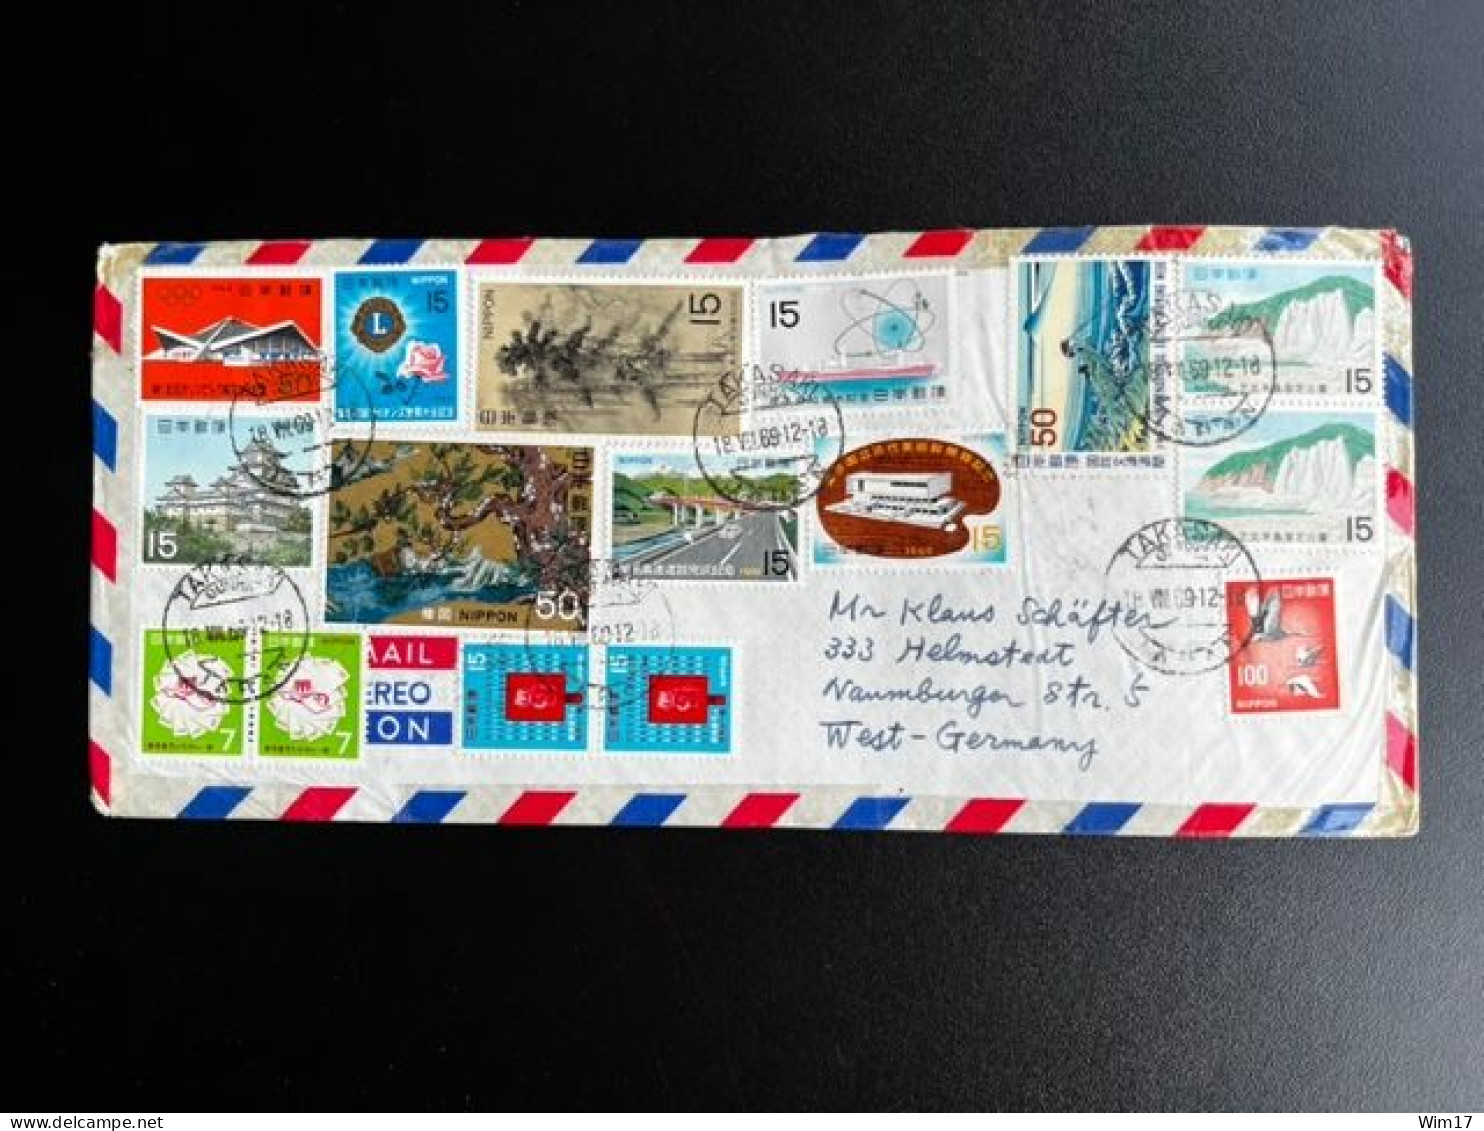 JAPAN NIPPON 1969 AIR MAIL LETTER TAKASAKI TO HELMSTEDT GERMANY 18-08-1969 - Briefe U. Dokumente